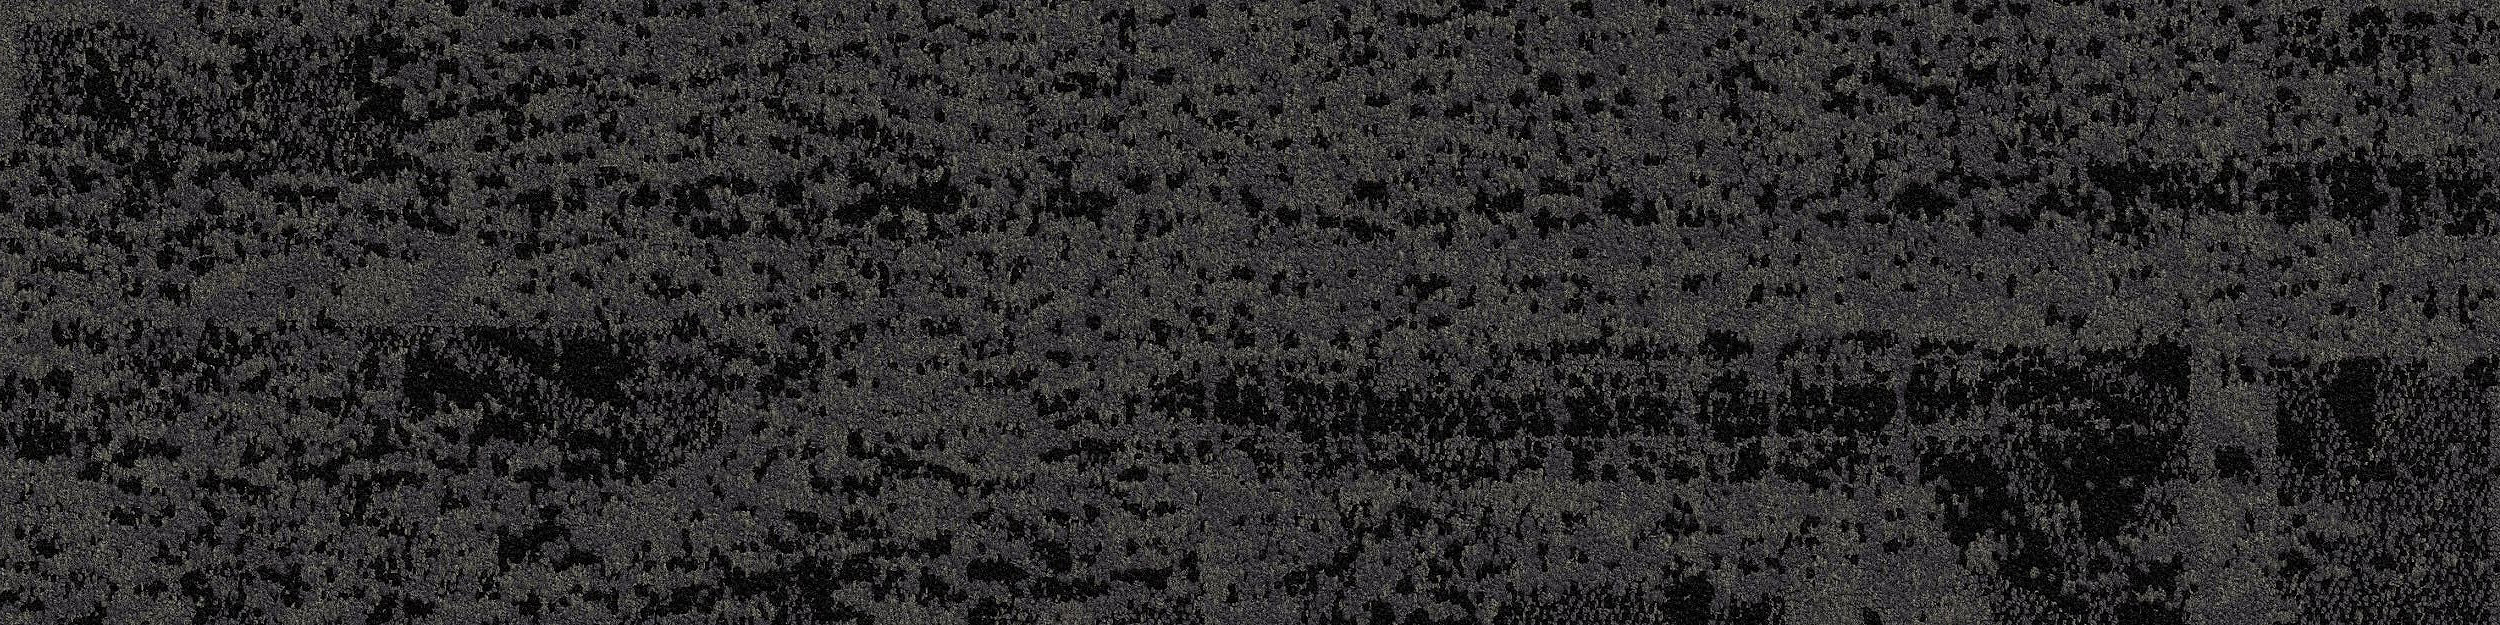 PM57 Carpet Tile In Charcoal image number 5